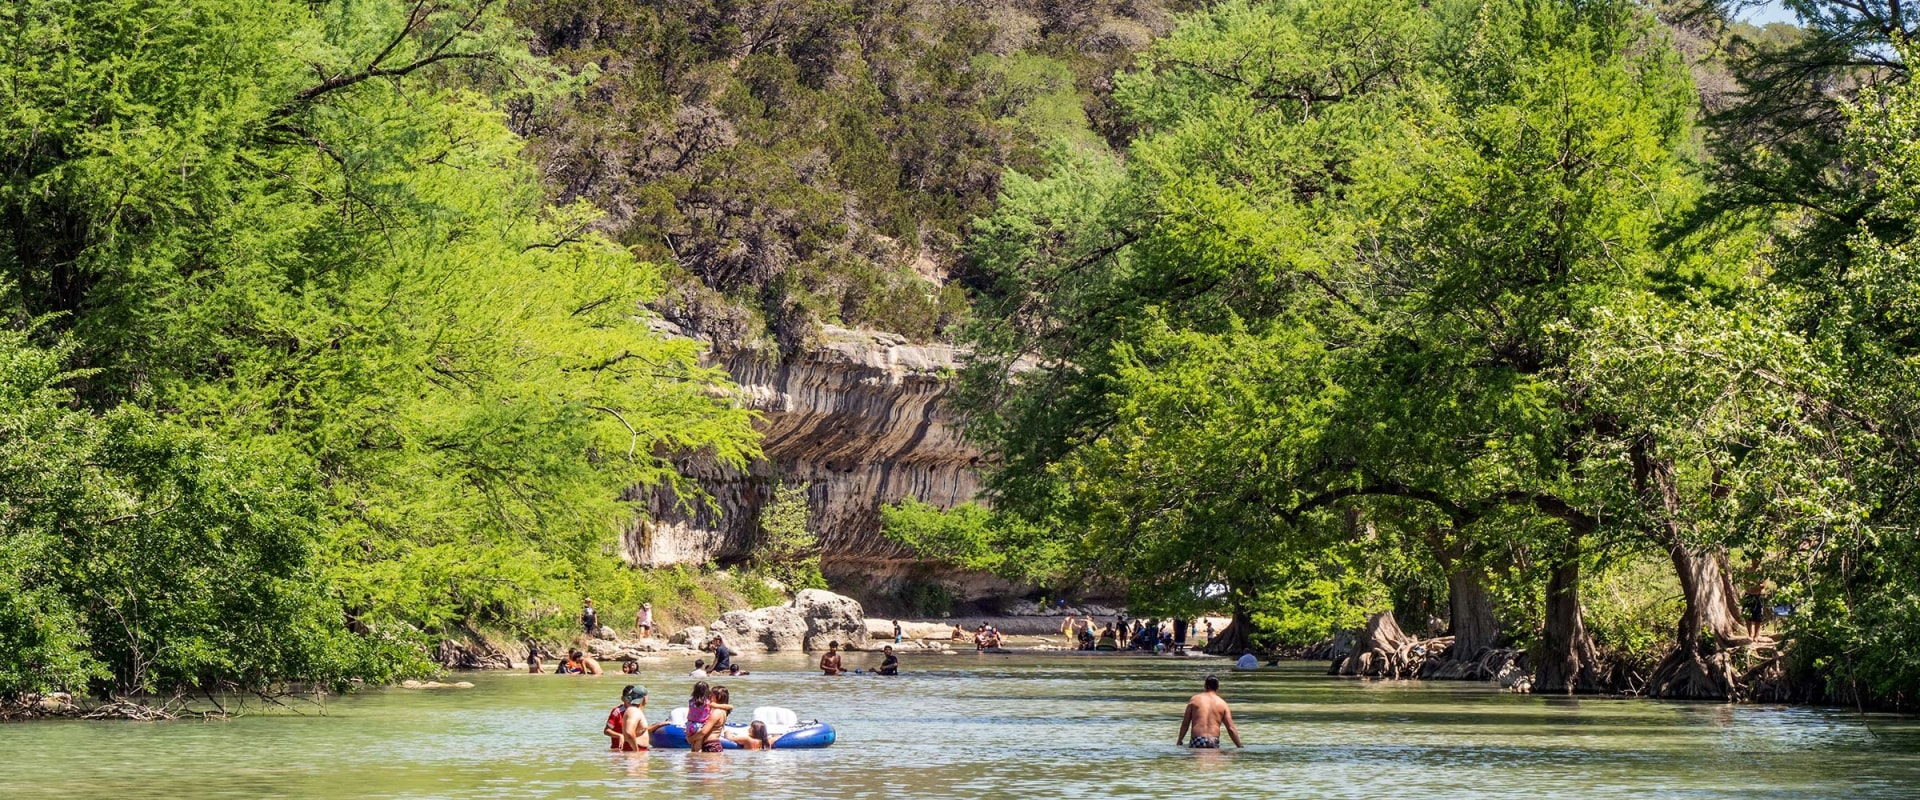 Camping at Guadalupe River State Park: An Outdoor Adventure to Remember